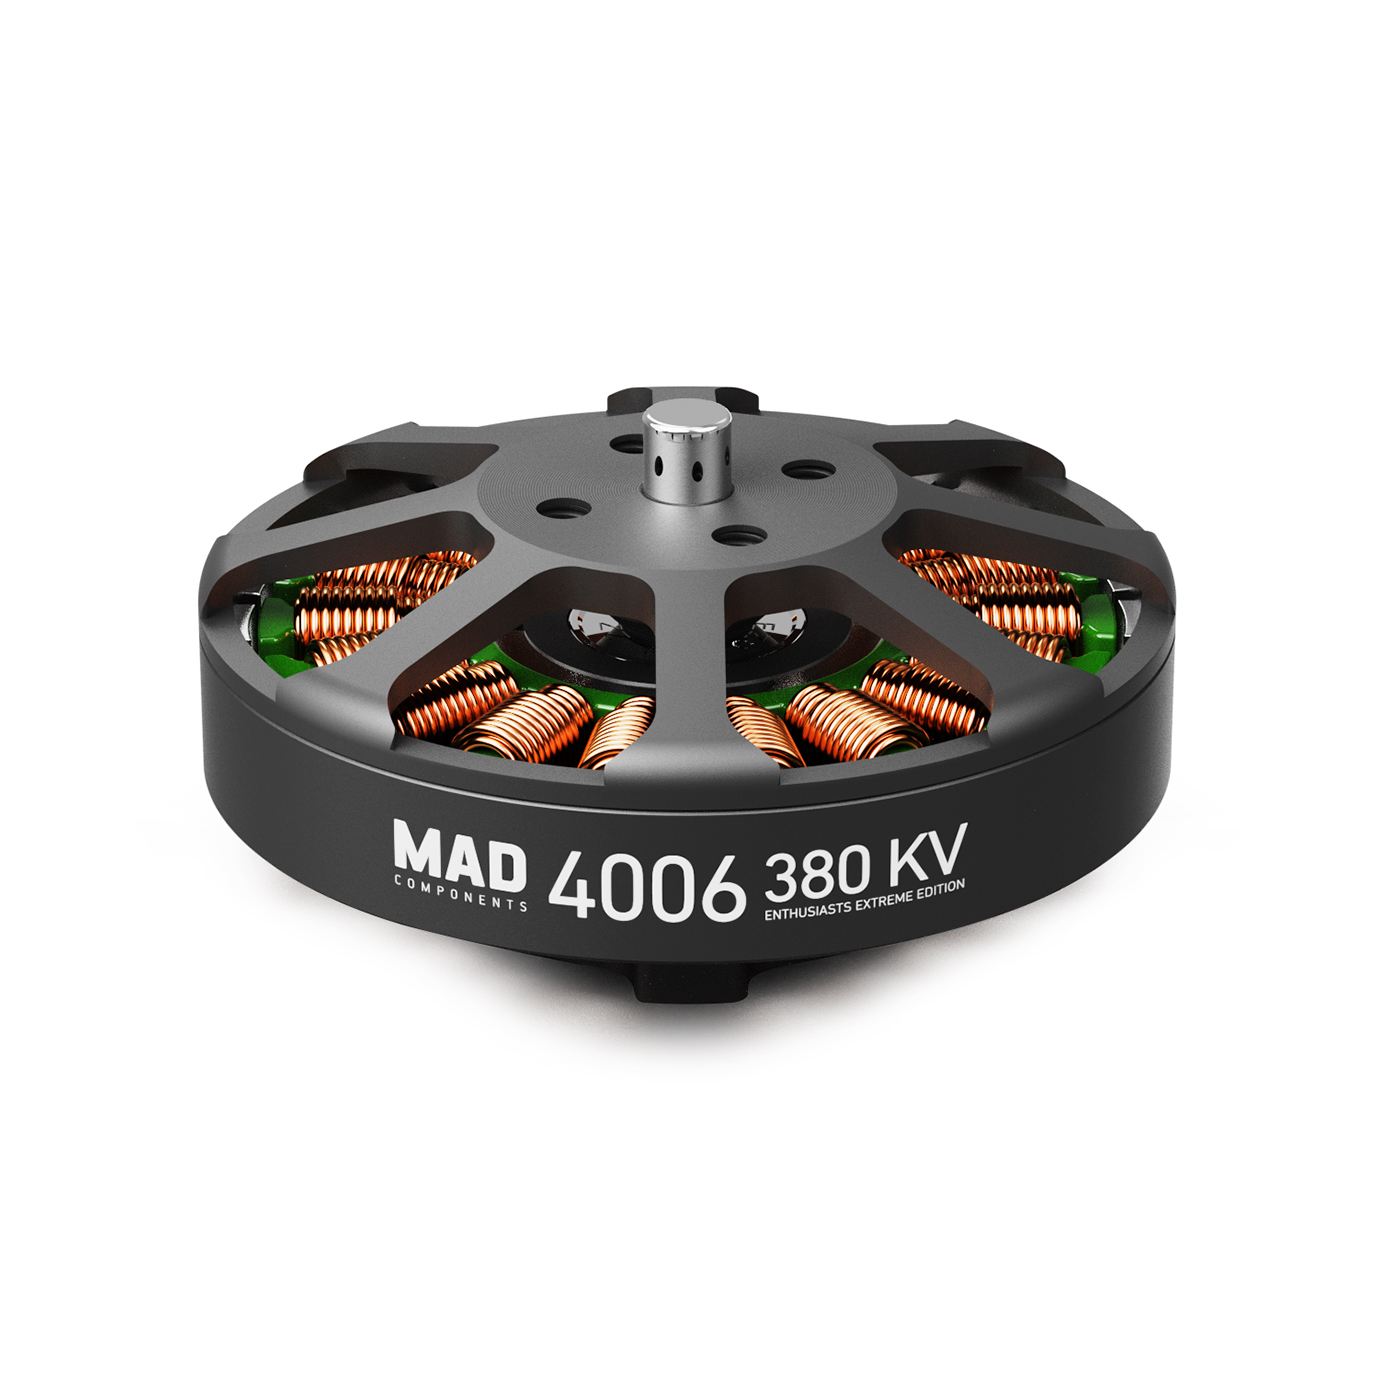 MAD 4008 EEE brushless motor for the long-range inspection drone mapping drone surveying drone quadcopter hexcopter mulitirotor